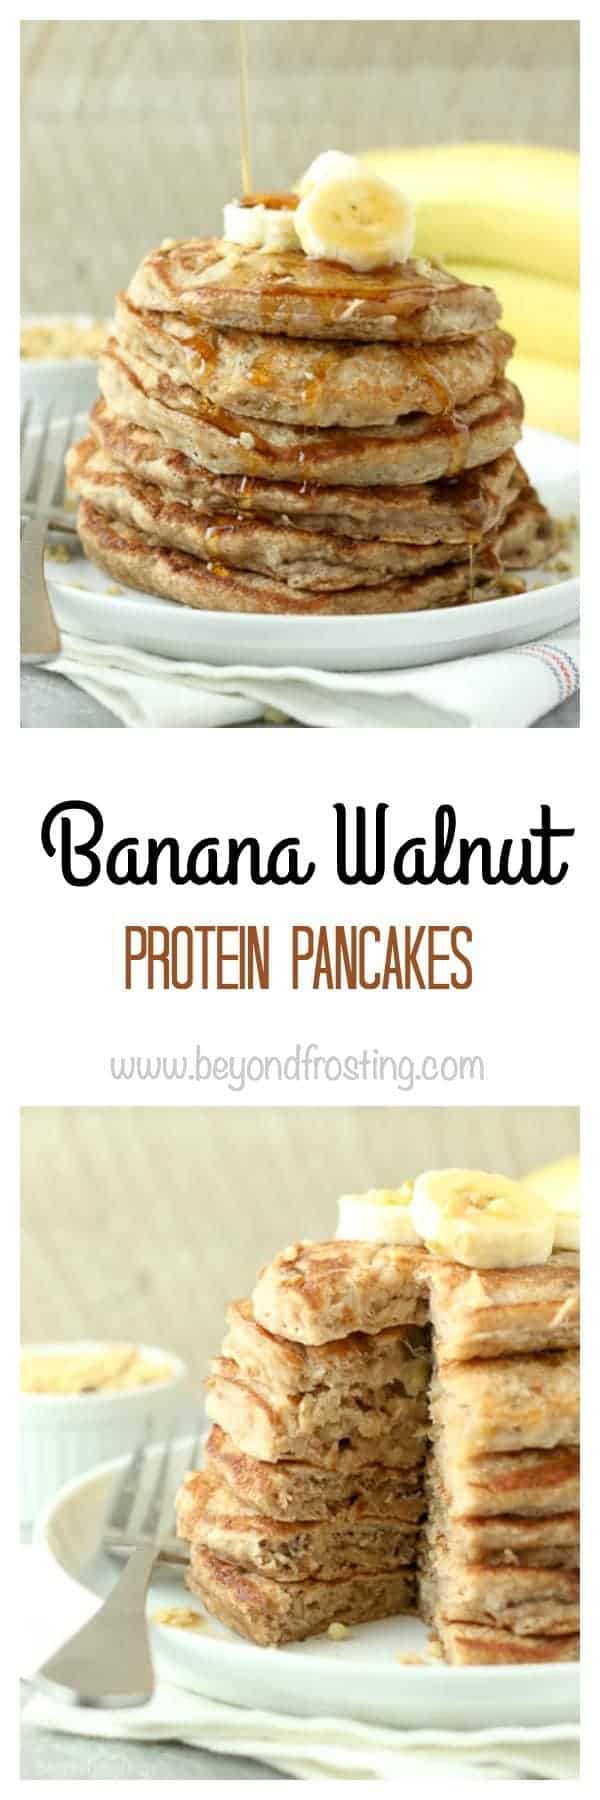  These Banana Walnut Protein Pancakes come together in a snap. With fresh bananas, Krusteaz Protein Pancake mix and a touch of cinnamon, you'll fall in love with this breakfast.